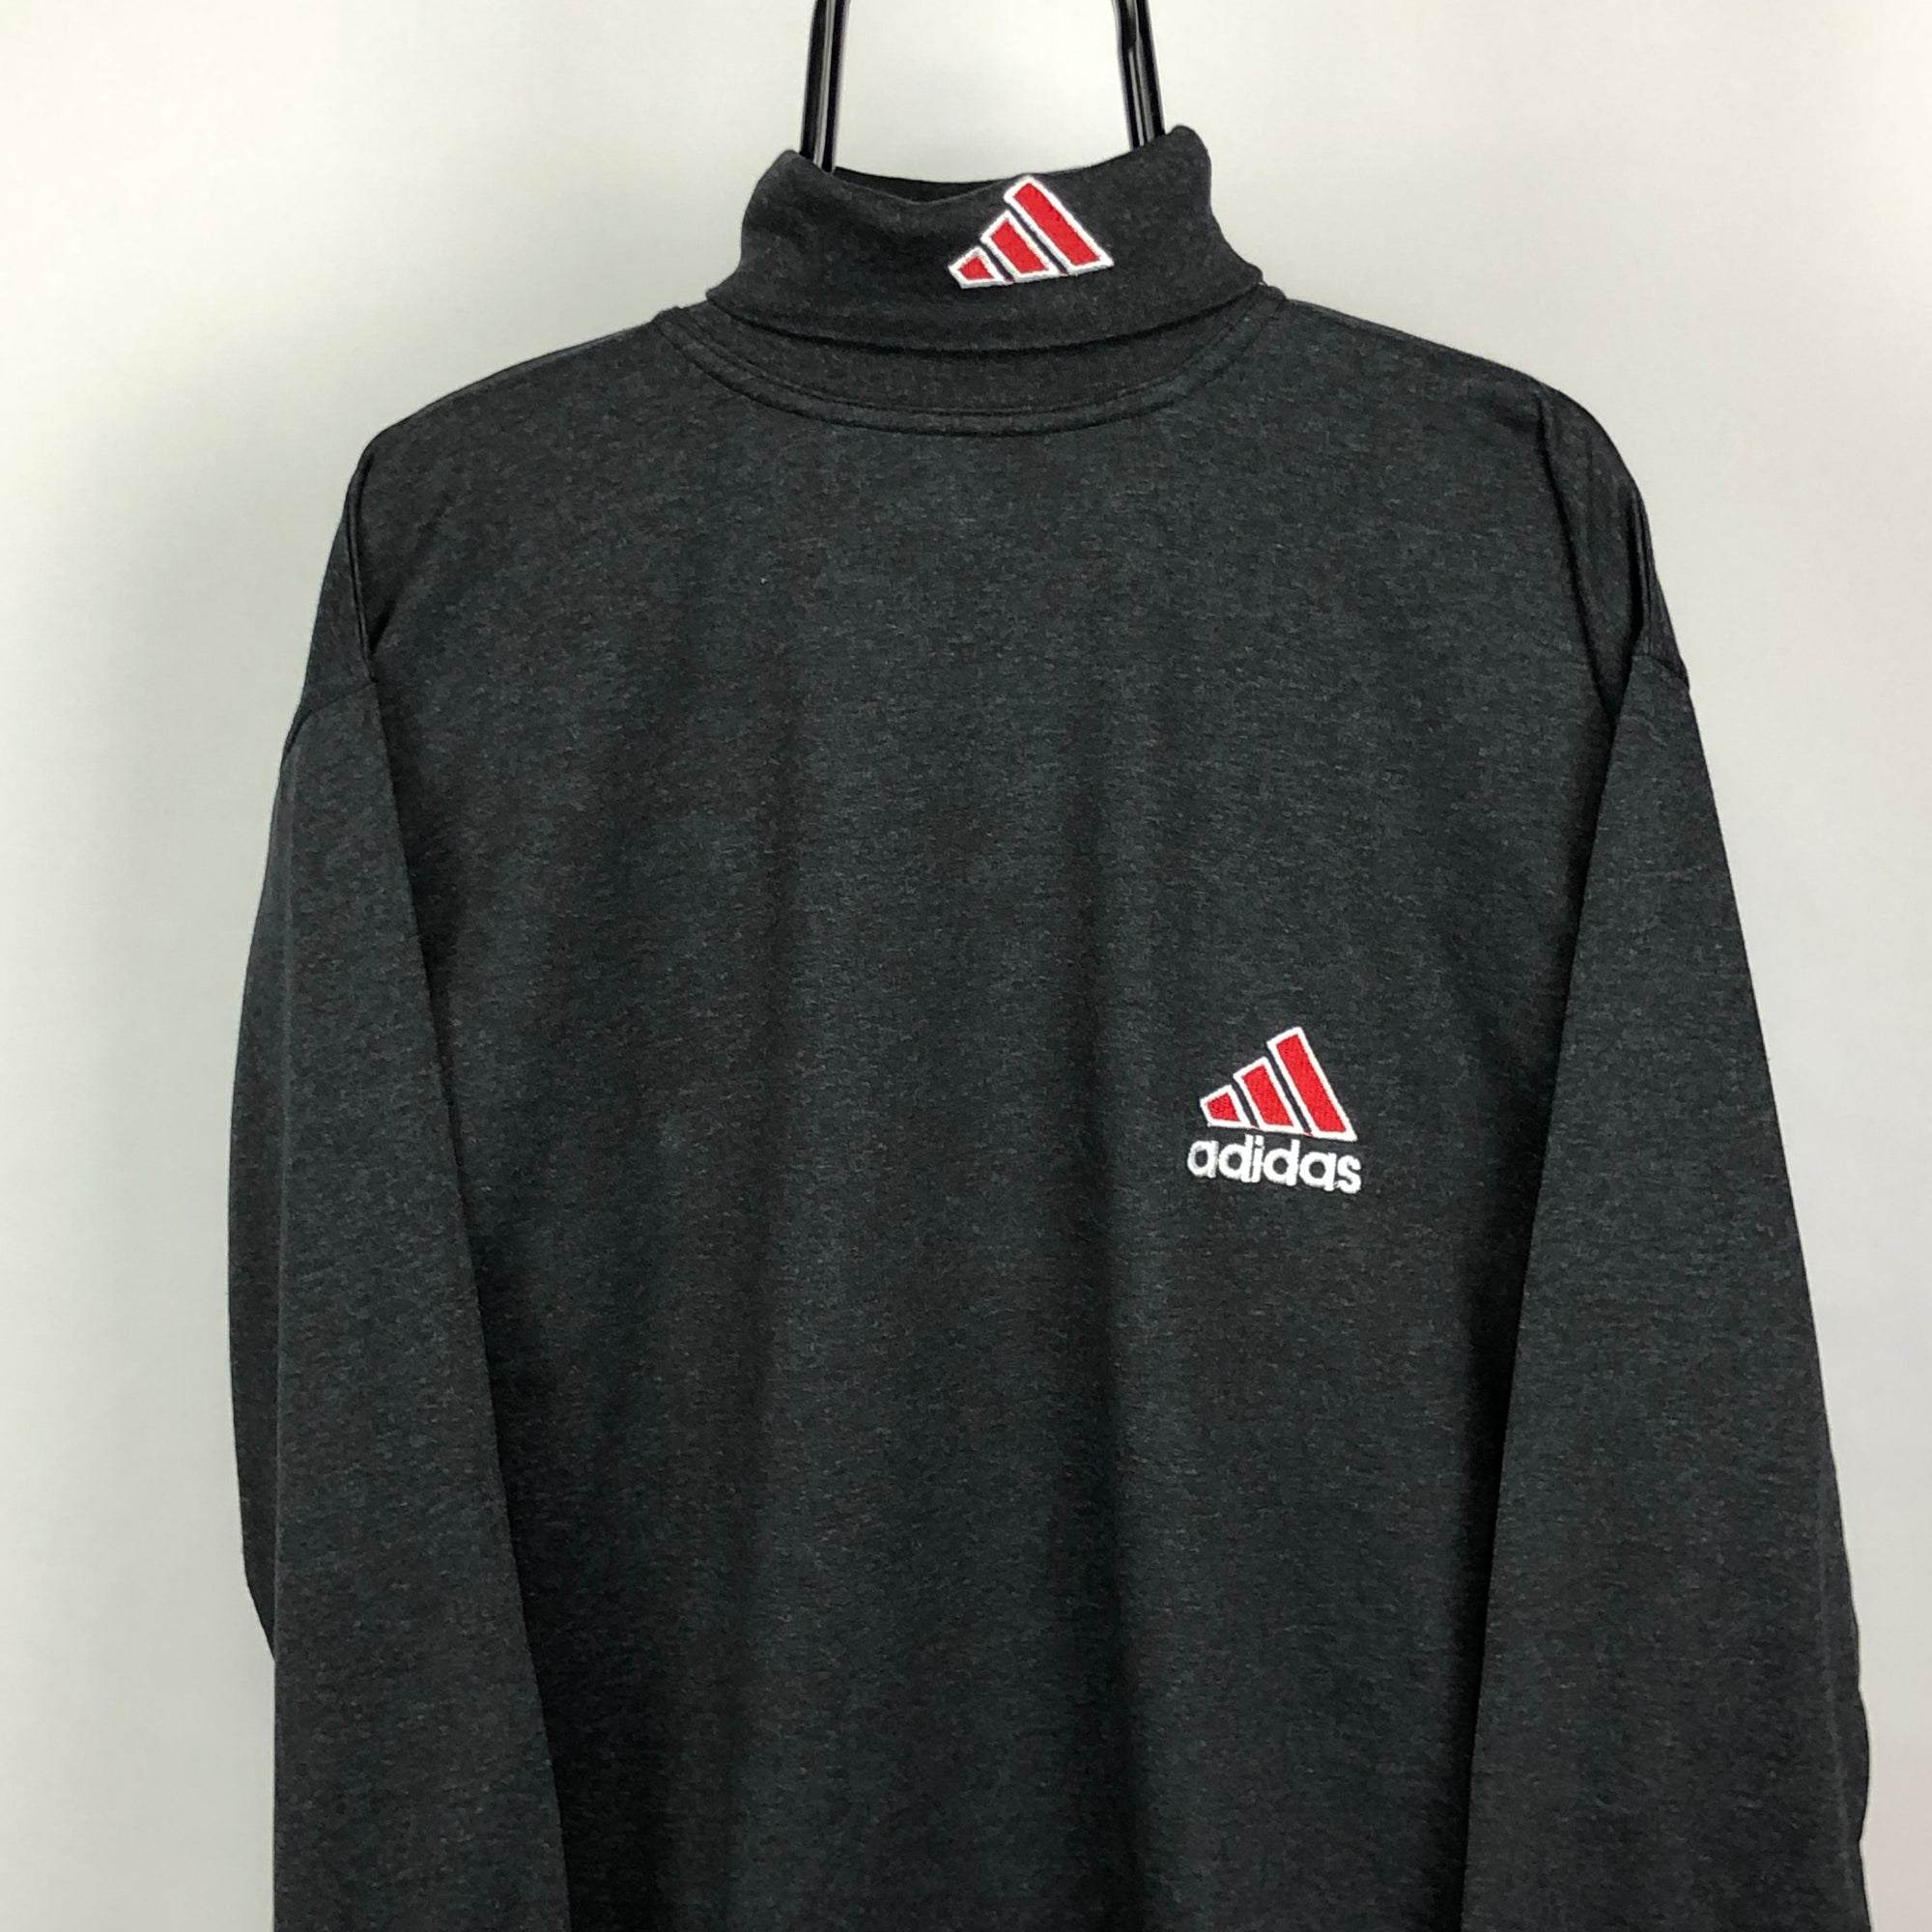 Vintage 90s Adidas Embroidered Spellout Turtle Neck in Grey - Men's Large/Women's XL